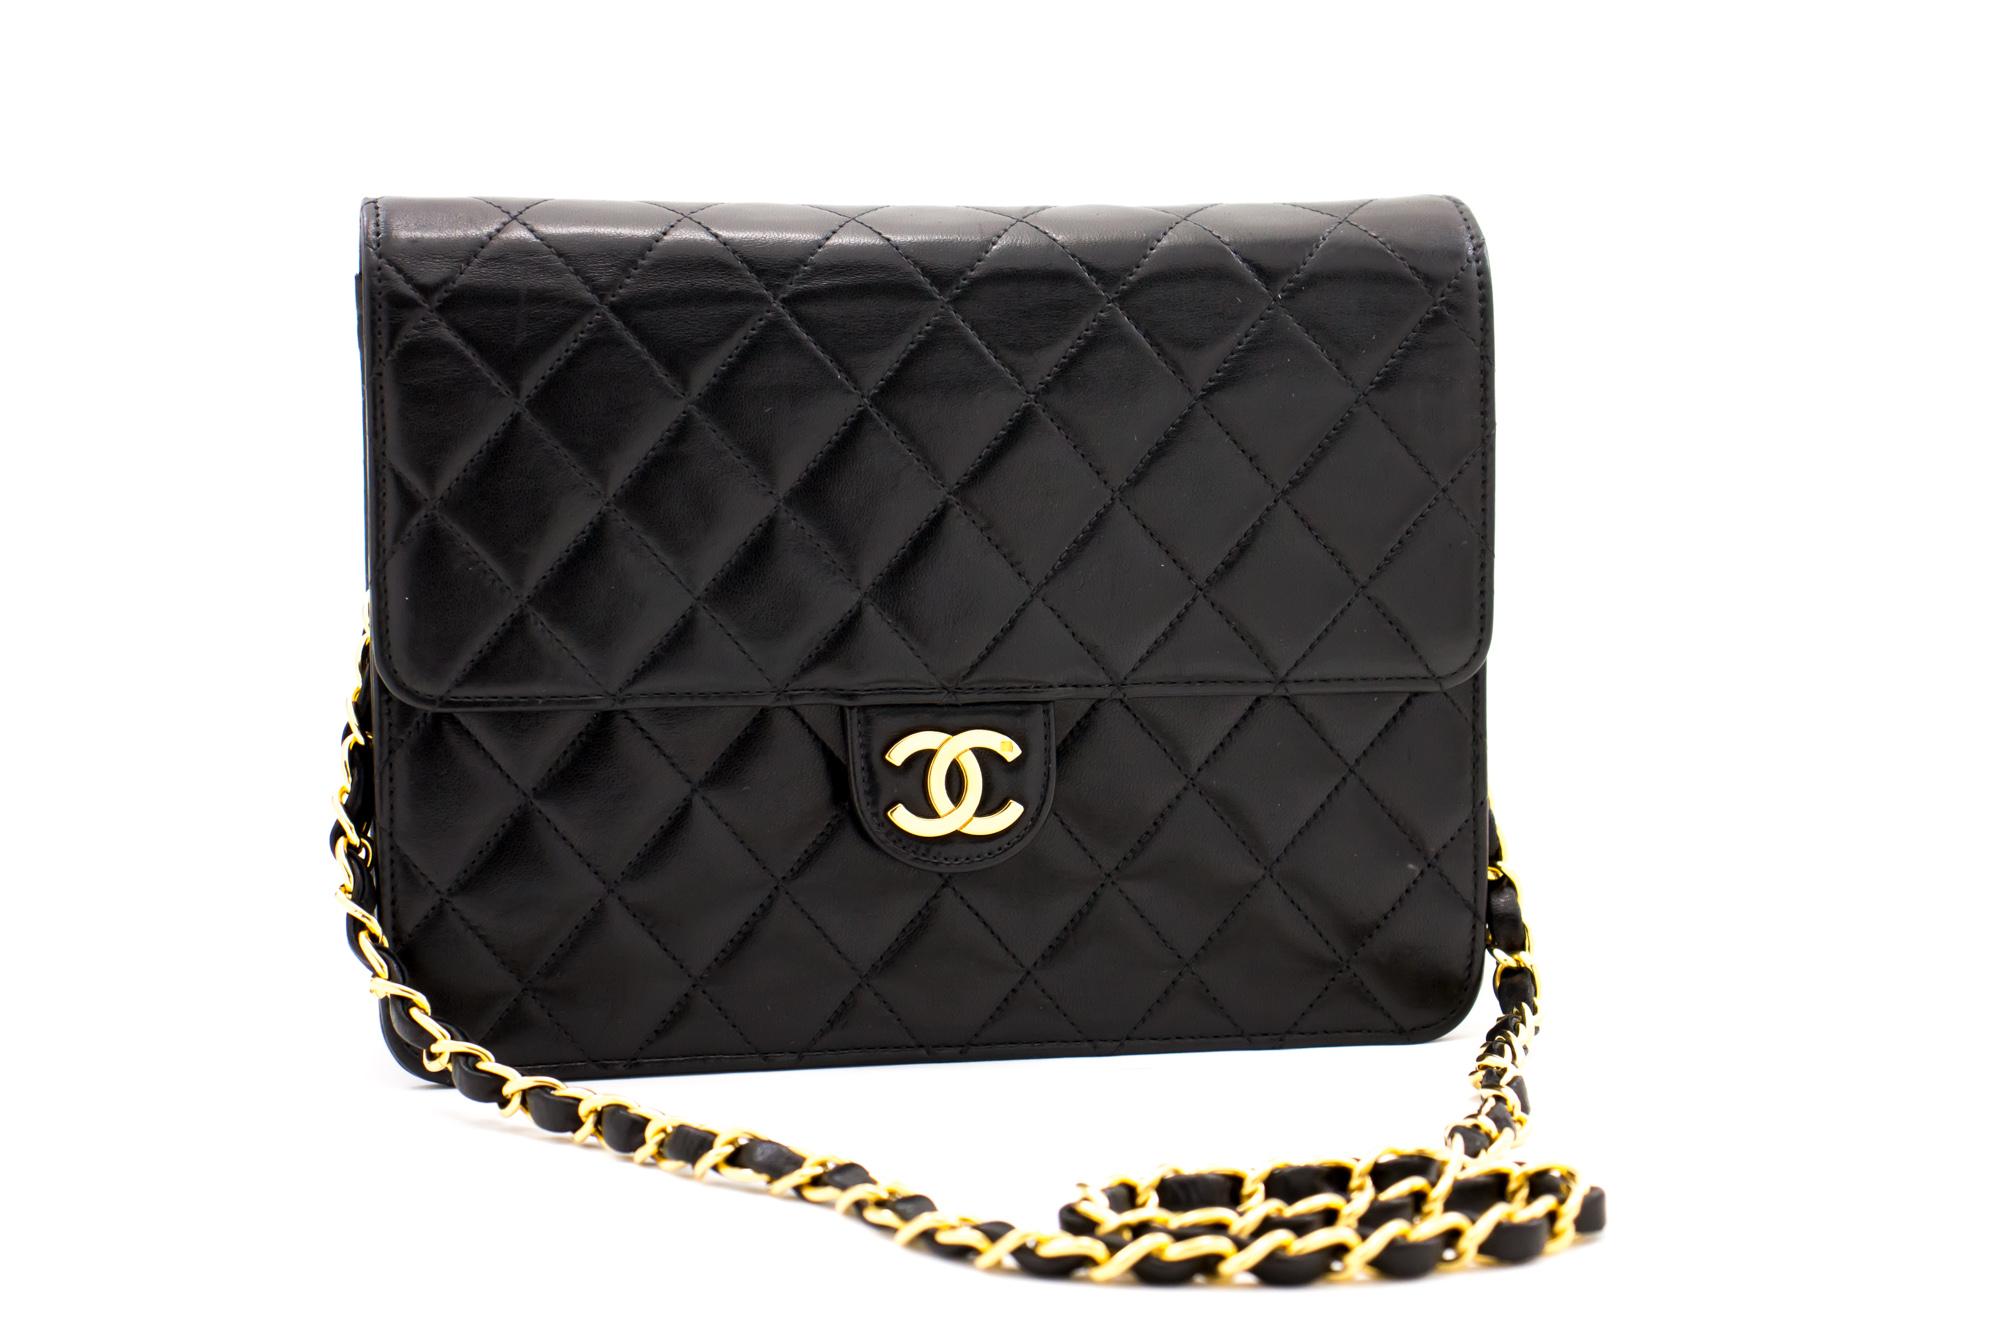 An authentic CHANEL Small Chain Shoulder Bag Clutch Black Quilted Flap made of black Lambskin. The color is Black. The outside material is Leather. The pattern is Solid. This item is Contemporary. The year of manufacture would be 2012.
Conditions &